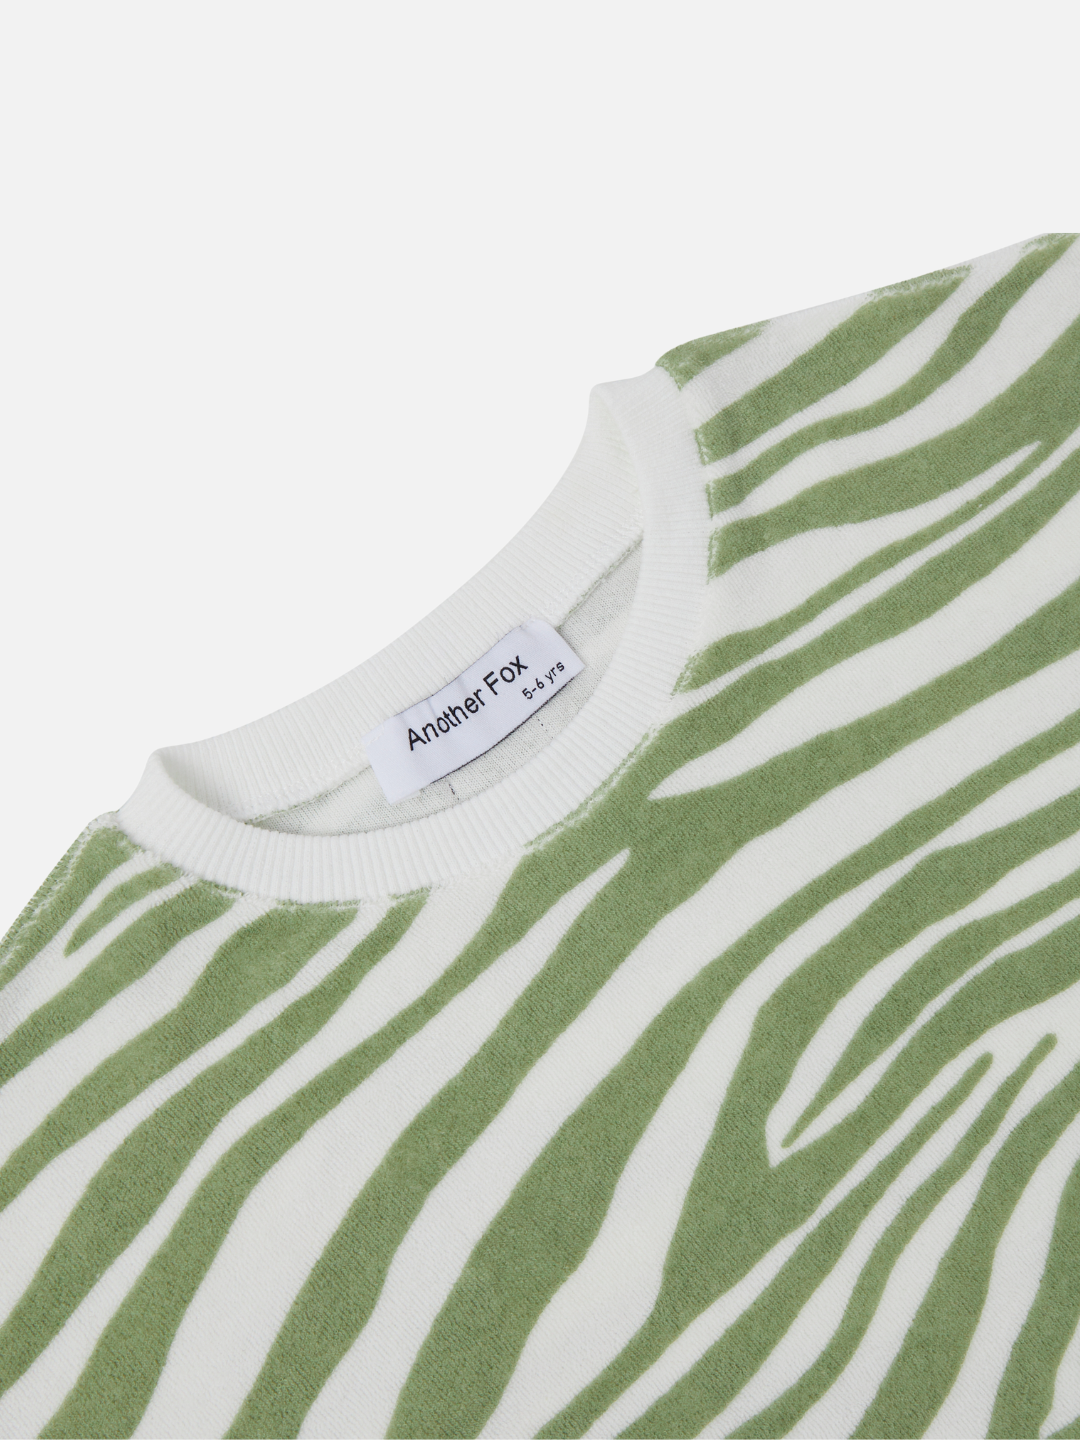 Tiger | Close up on the Terry Towel Tee in Tiger print